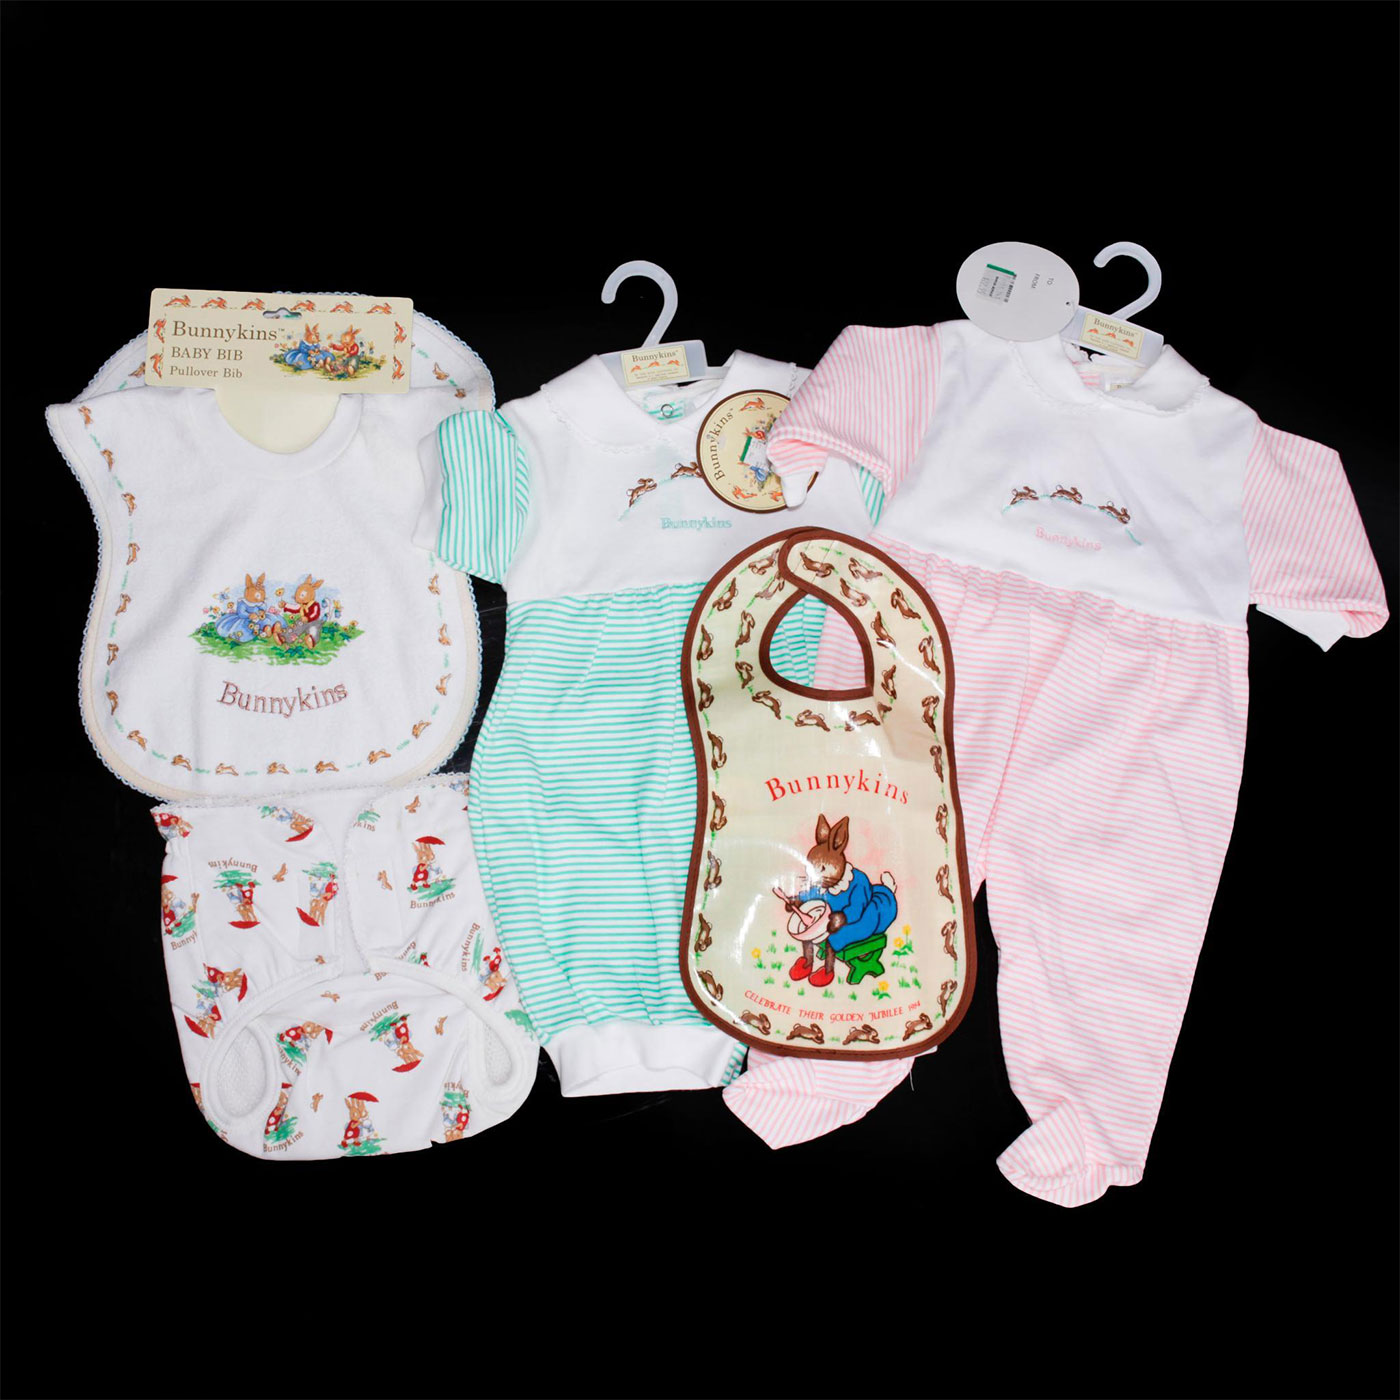 ROYAL DOULTON BUNNYKINS BABY CLOTHING AND ACCESSORIES - Image 6 of 8